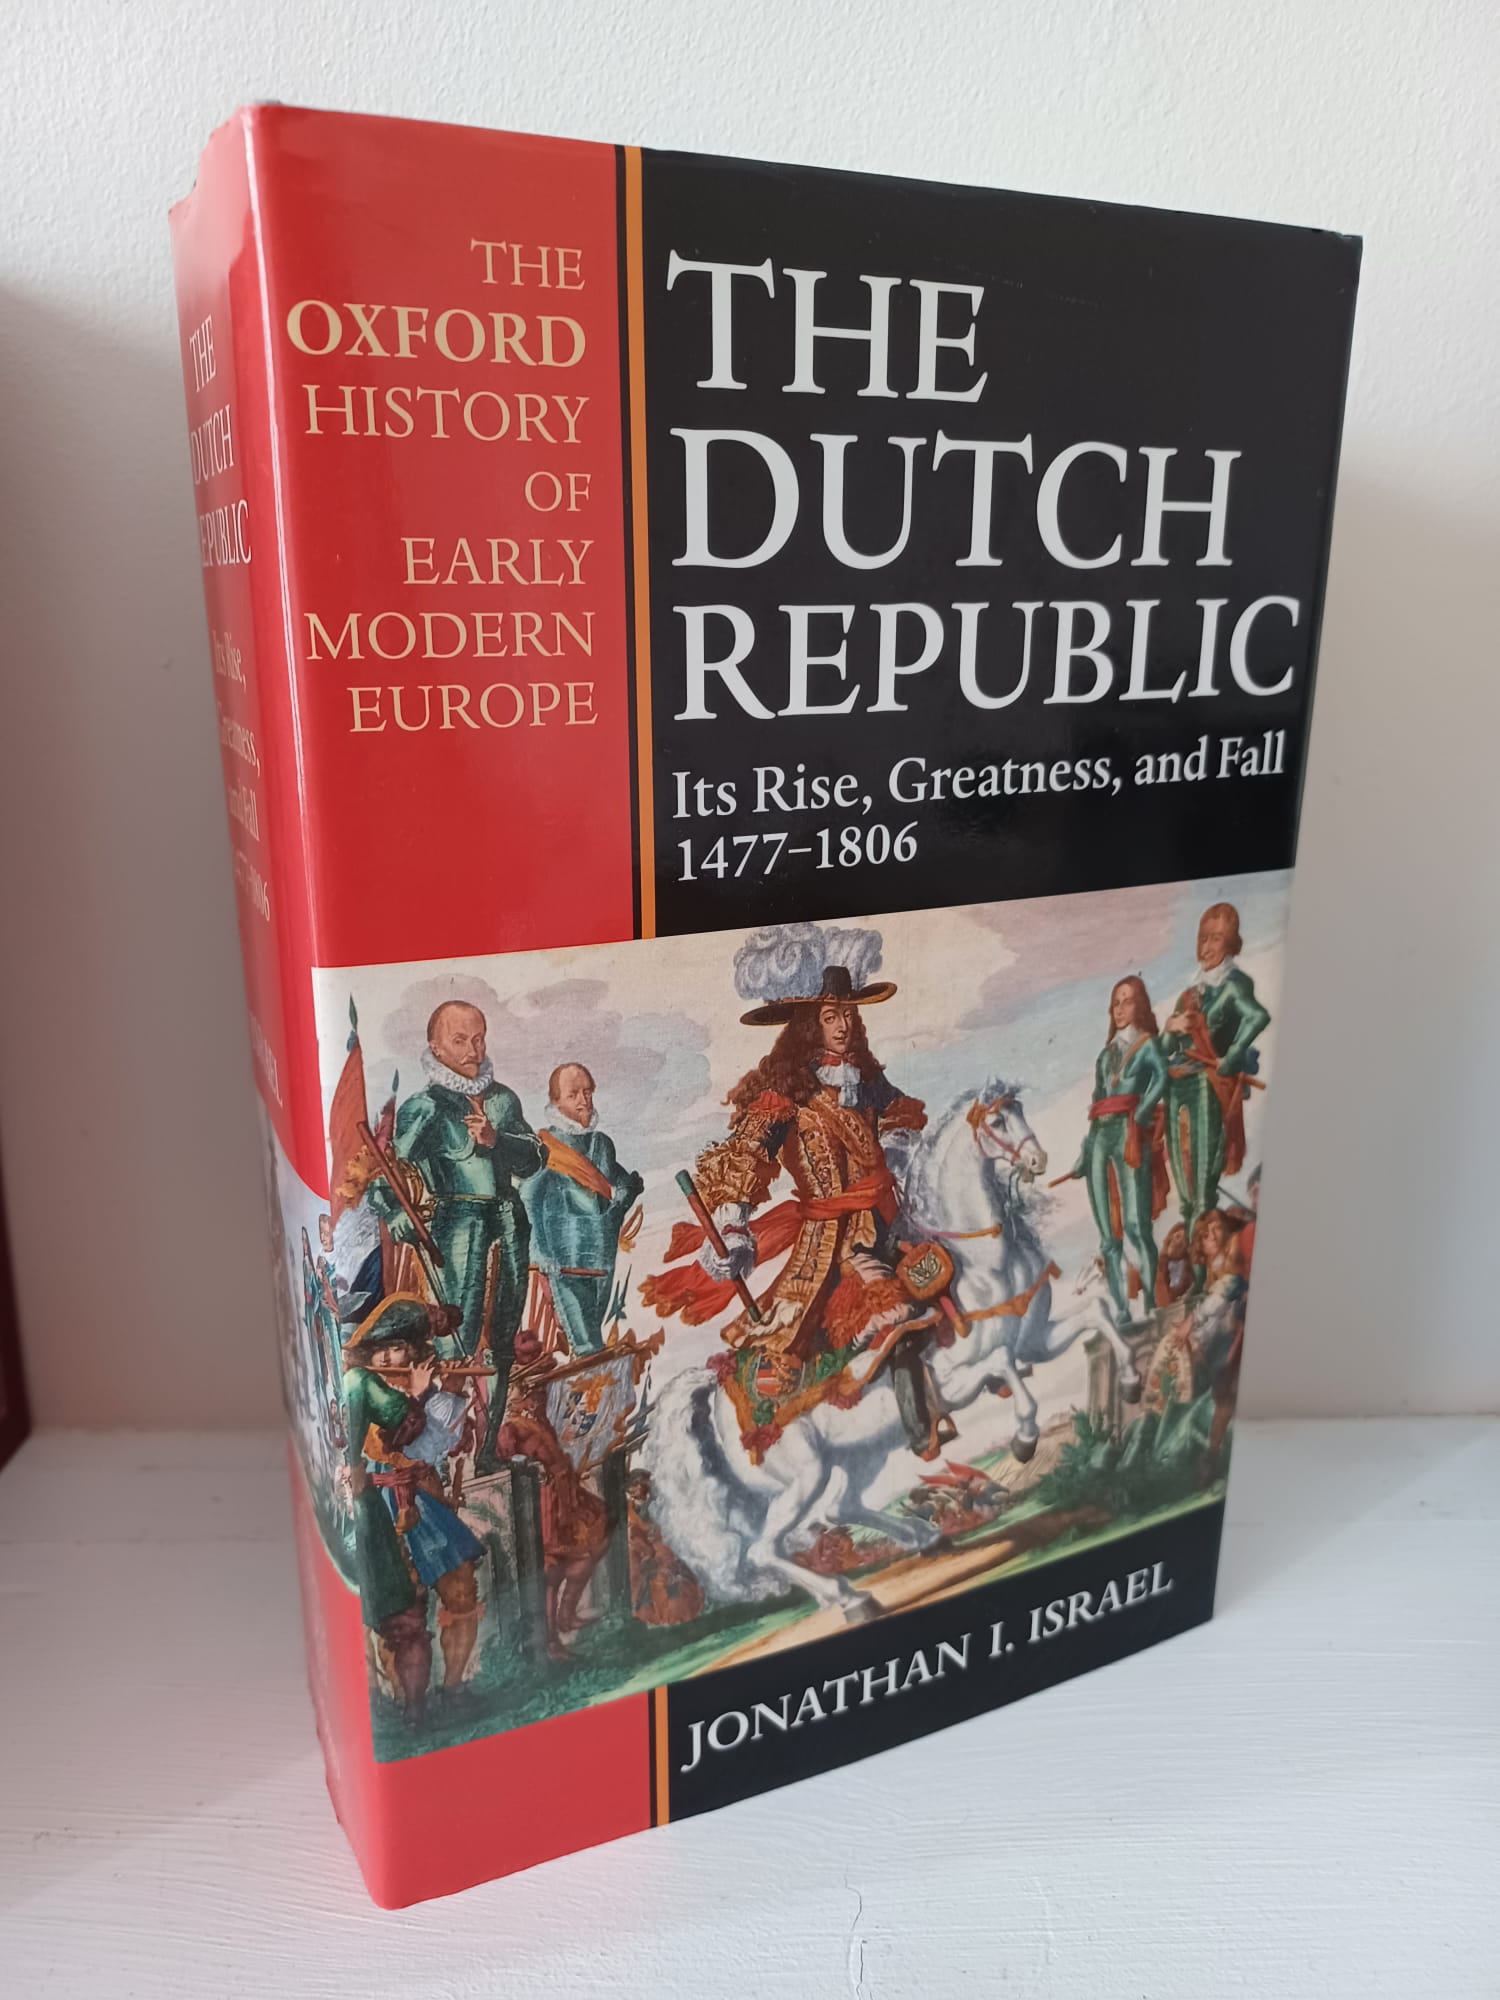 The Dutch Republic: Its Rise, Greatness, and Fall 1477-1806 - Jonathan I. Israel